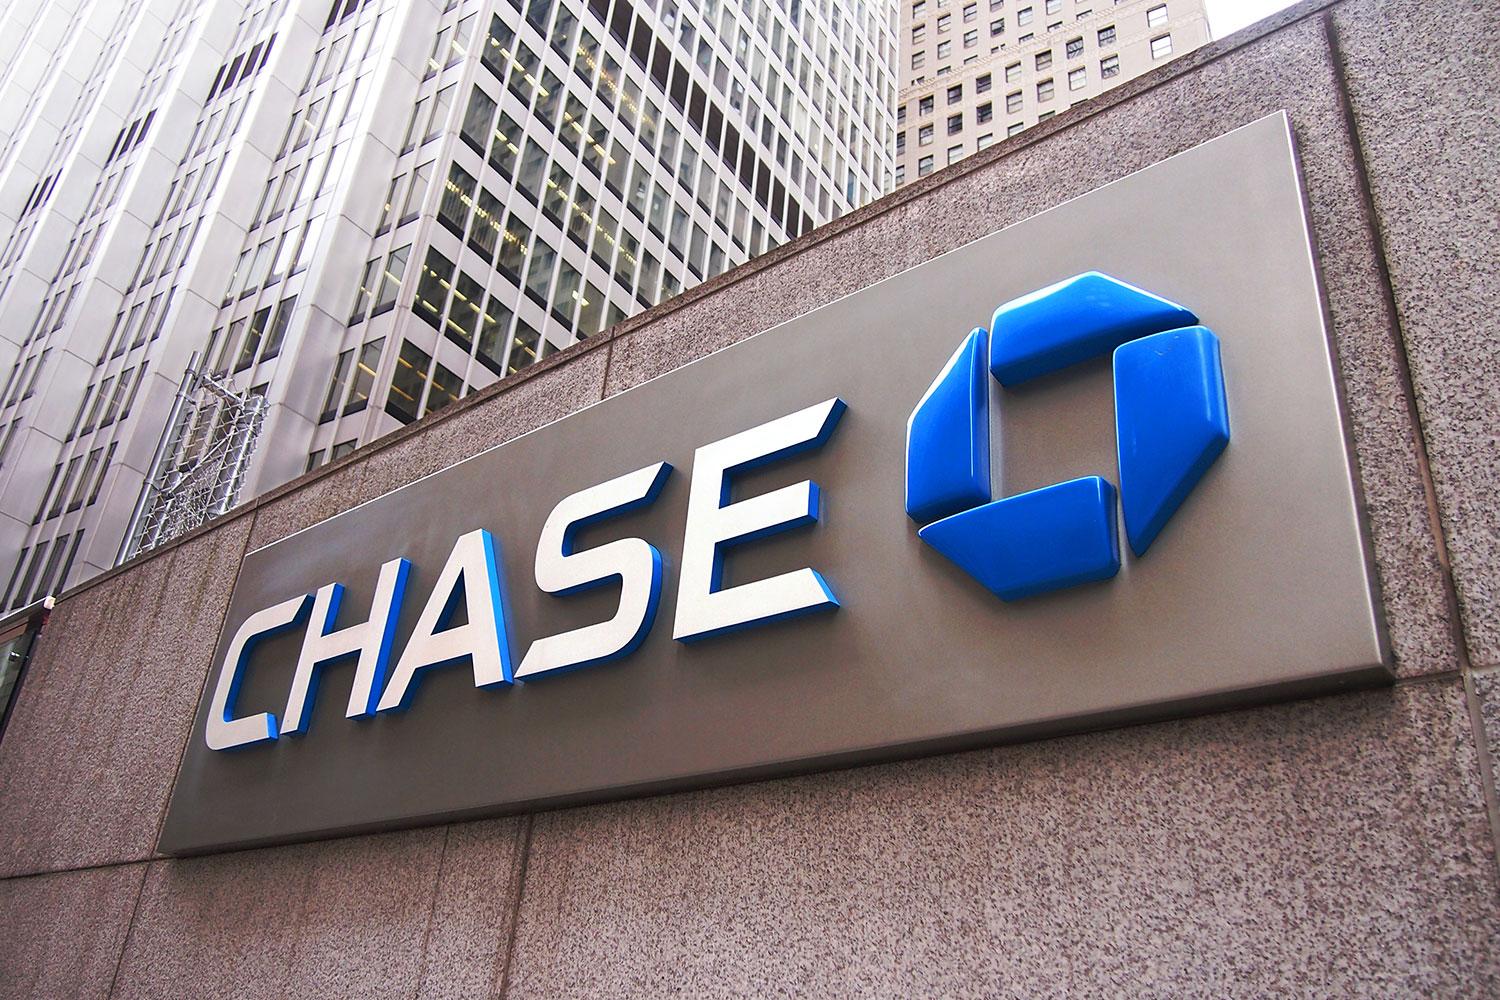 Get 500 for your Chase Account!